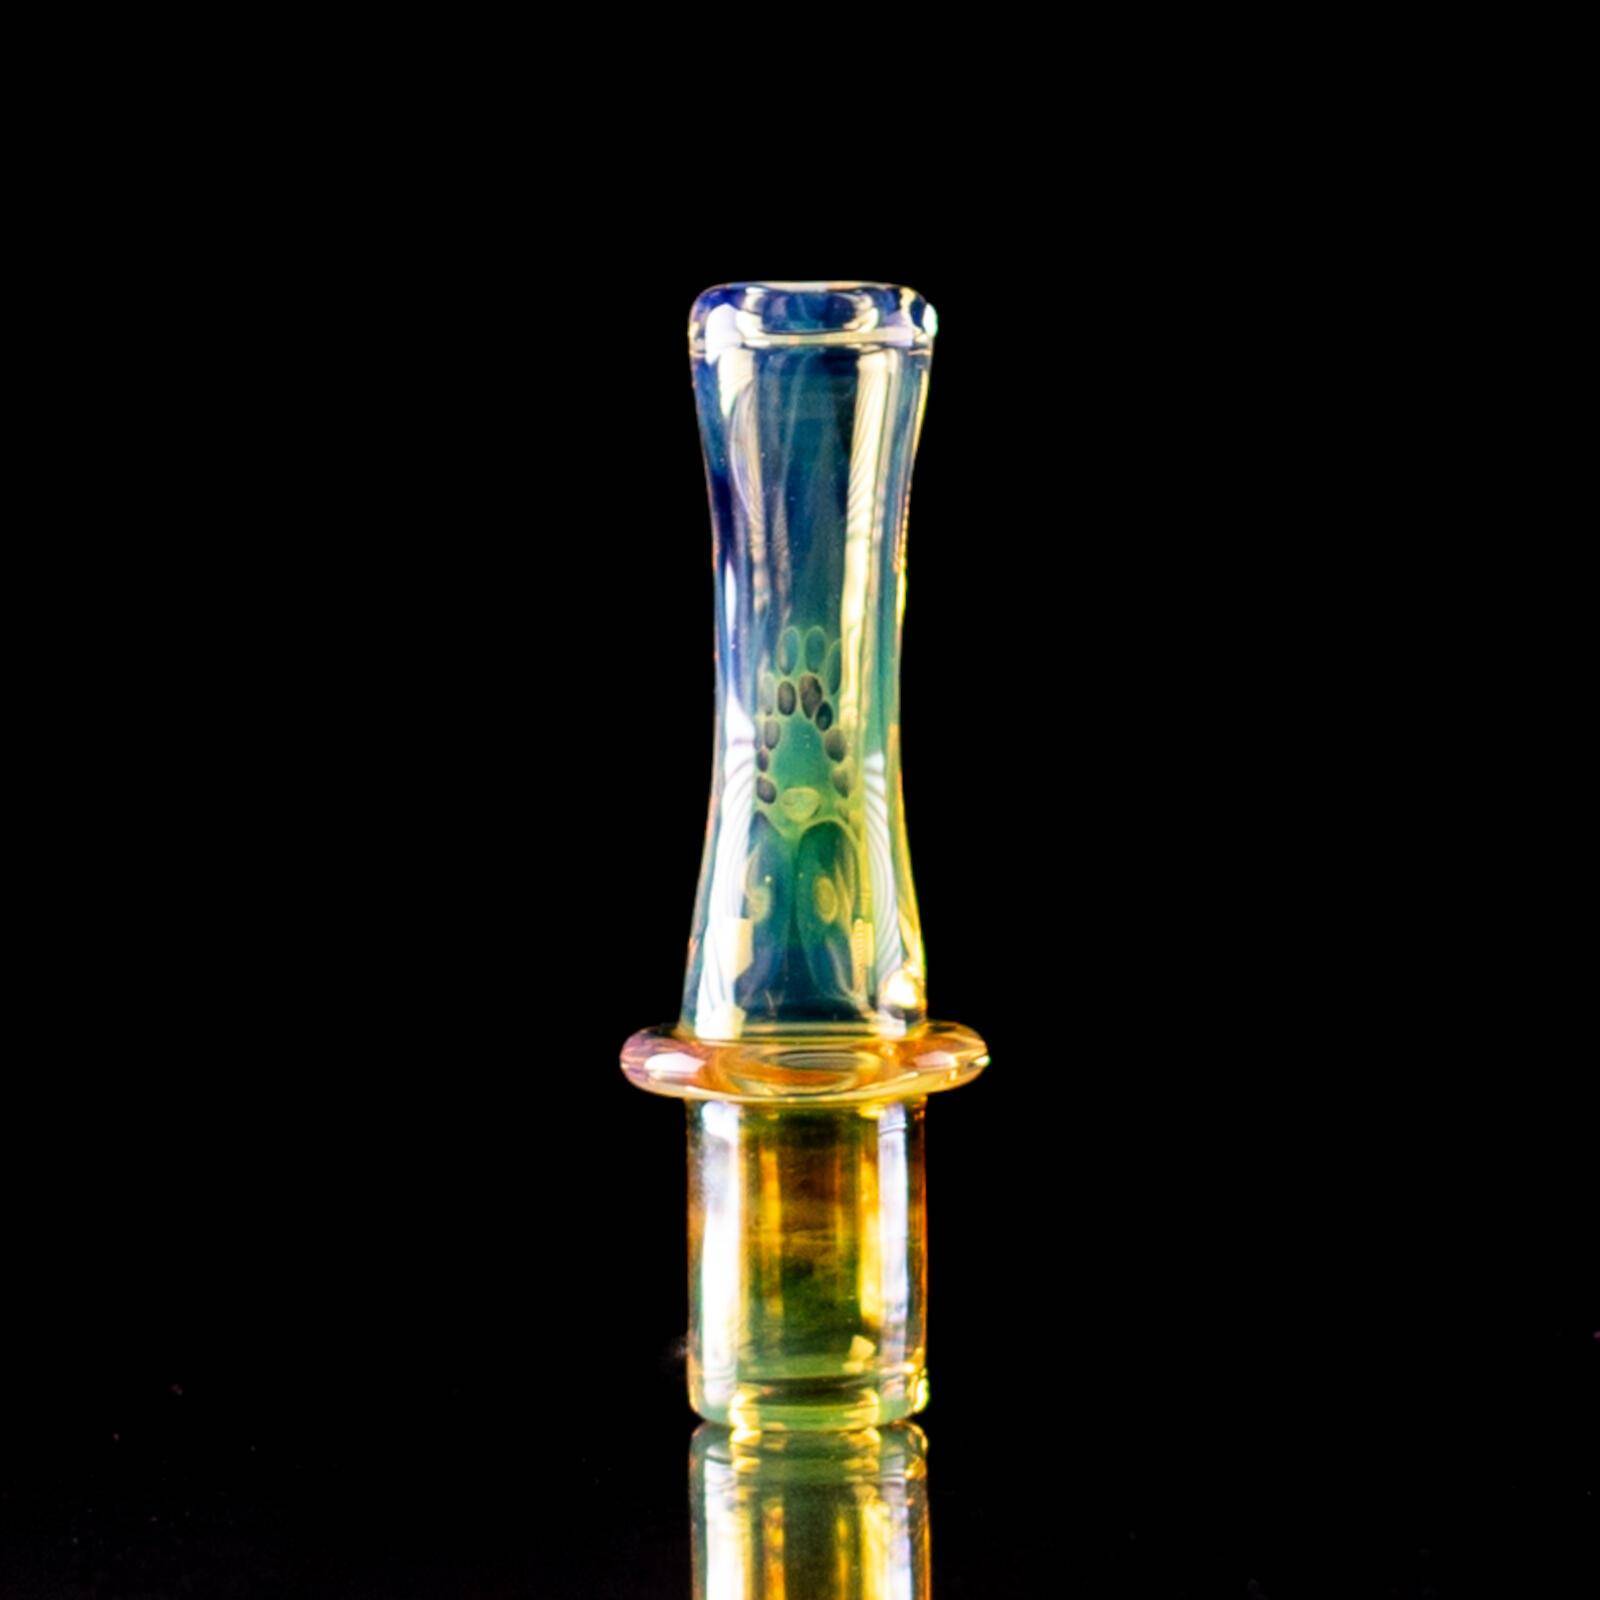 Fumed Joint Glass Tips